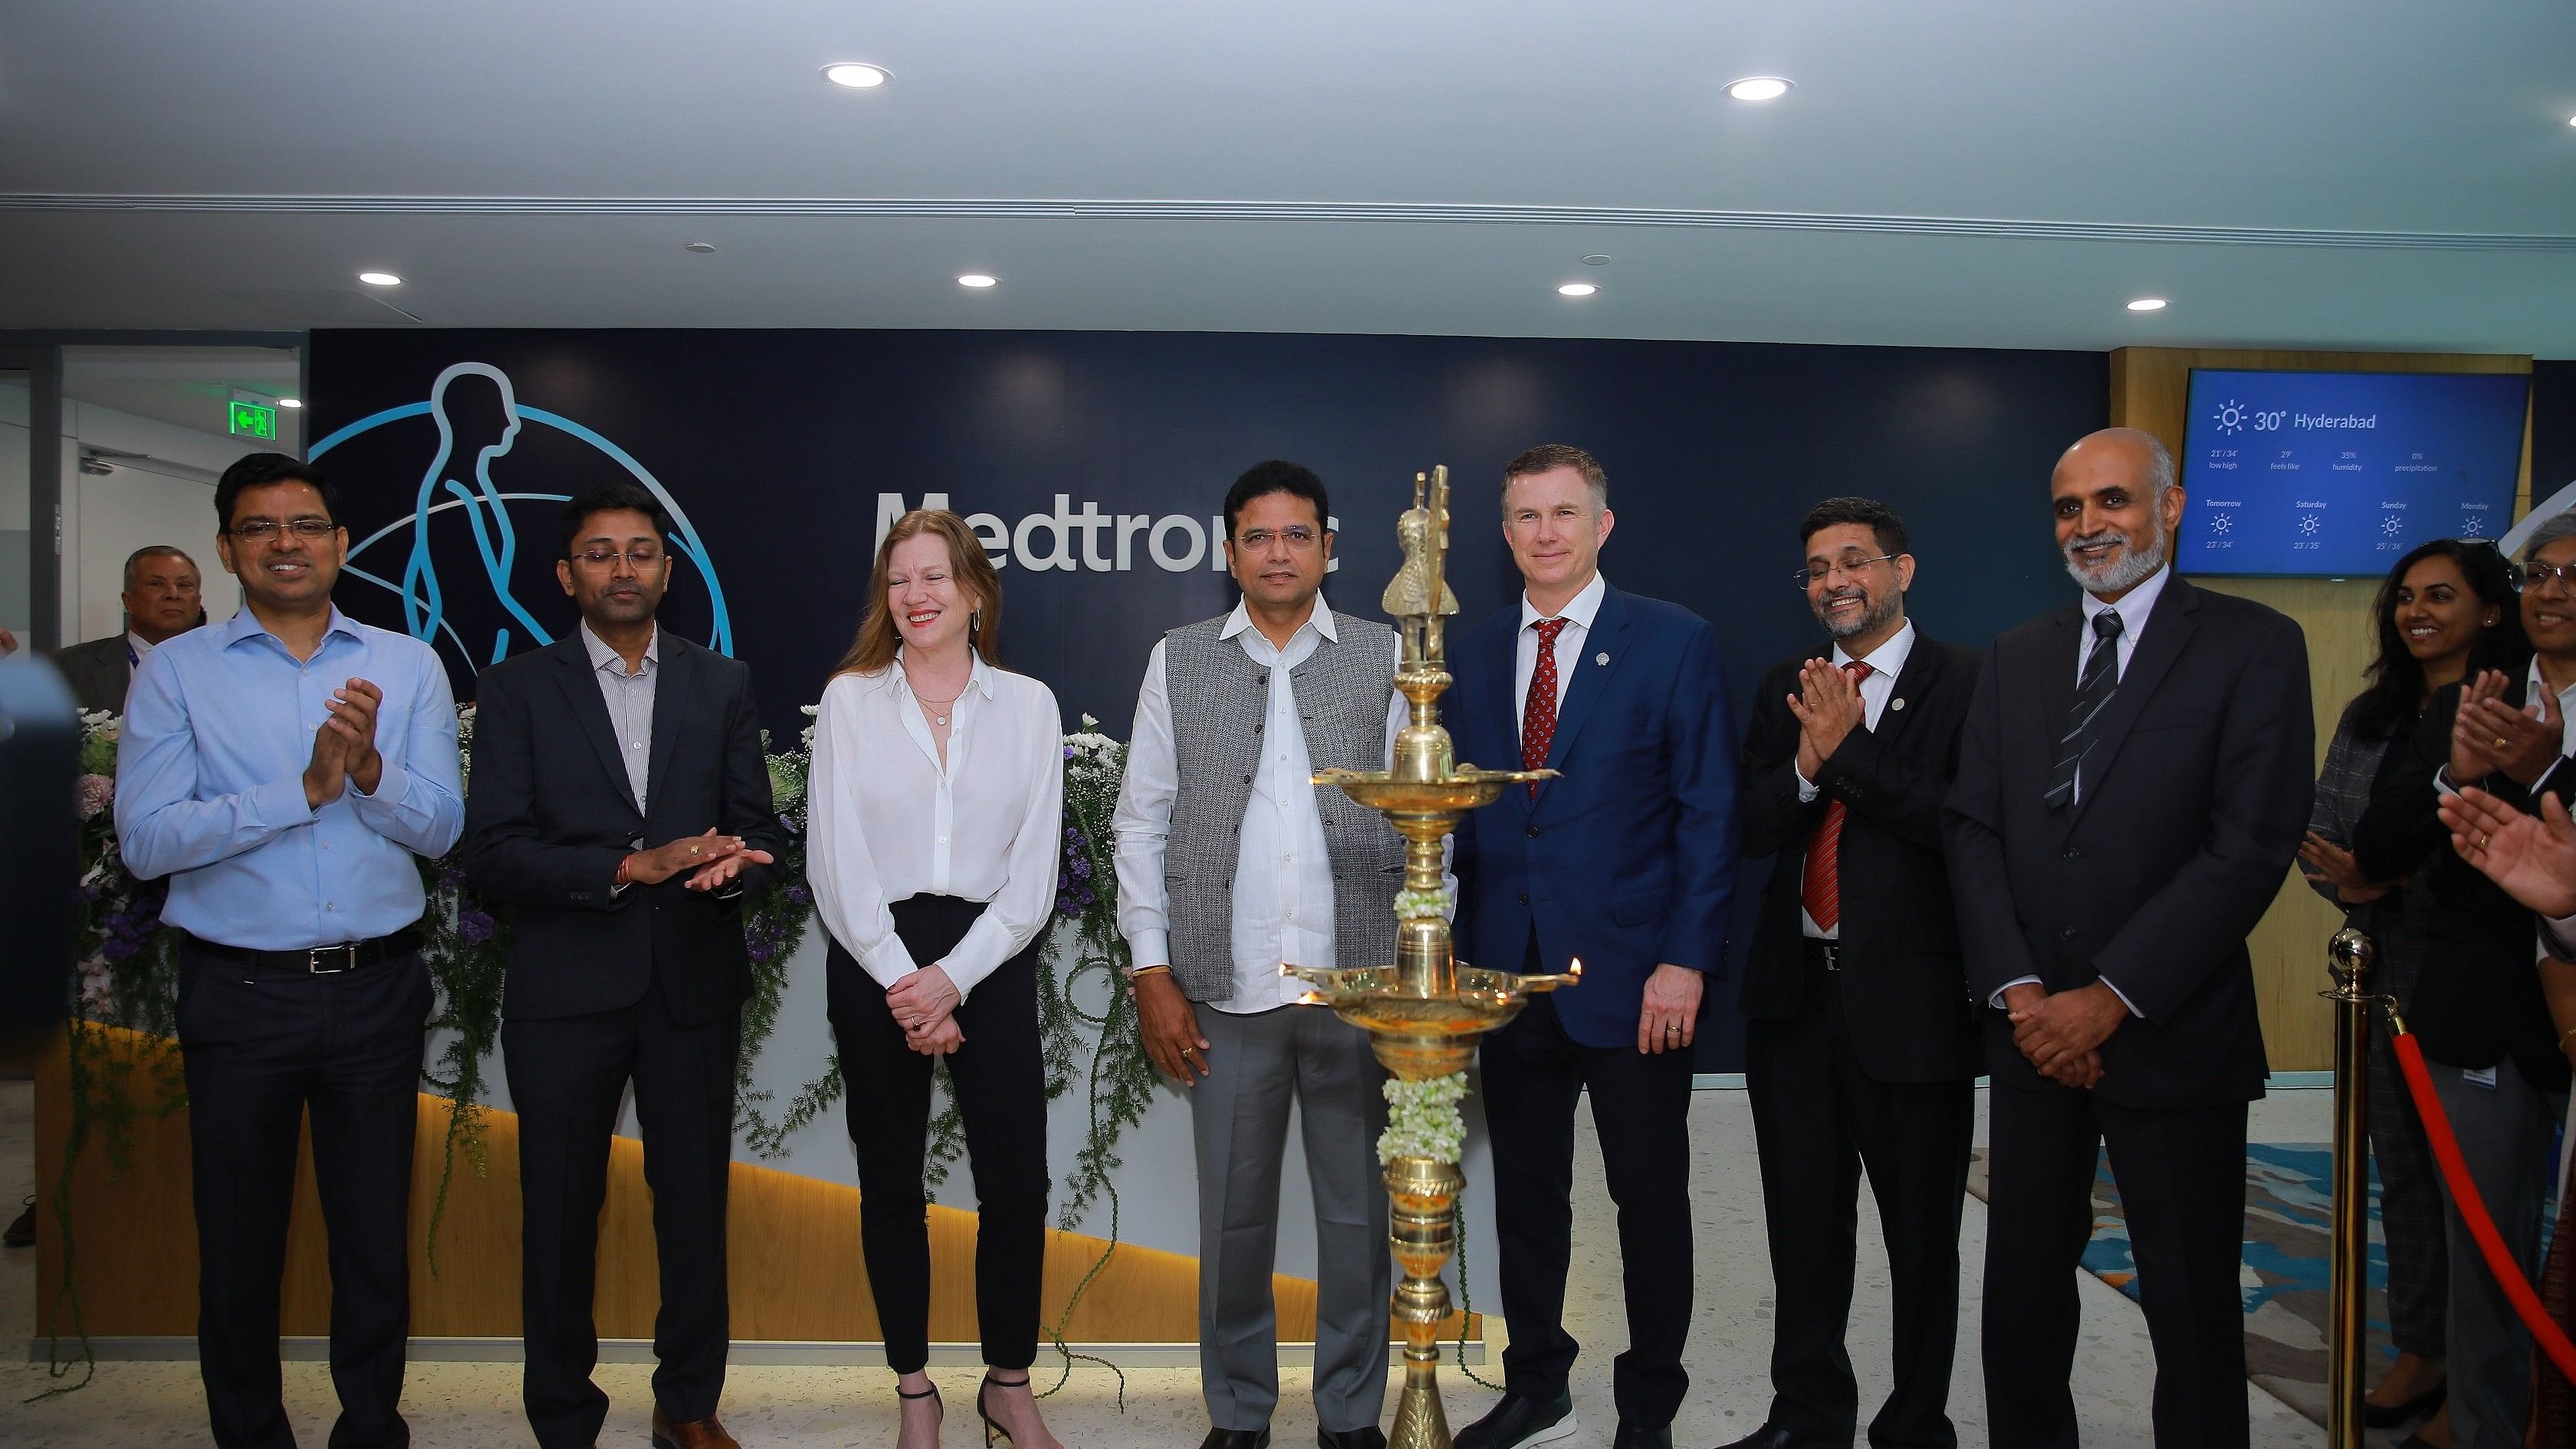 <div class="paragraphs"><p>Medtronic Chairman and CEO Geoff Martha said, their R&amp;D team in India plays a pivotal role in Medtronic’s global product development and MEIC‘s expansion marks a significant milestone in strengthening our global R&amp;D capabilities.</p></div>